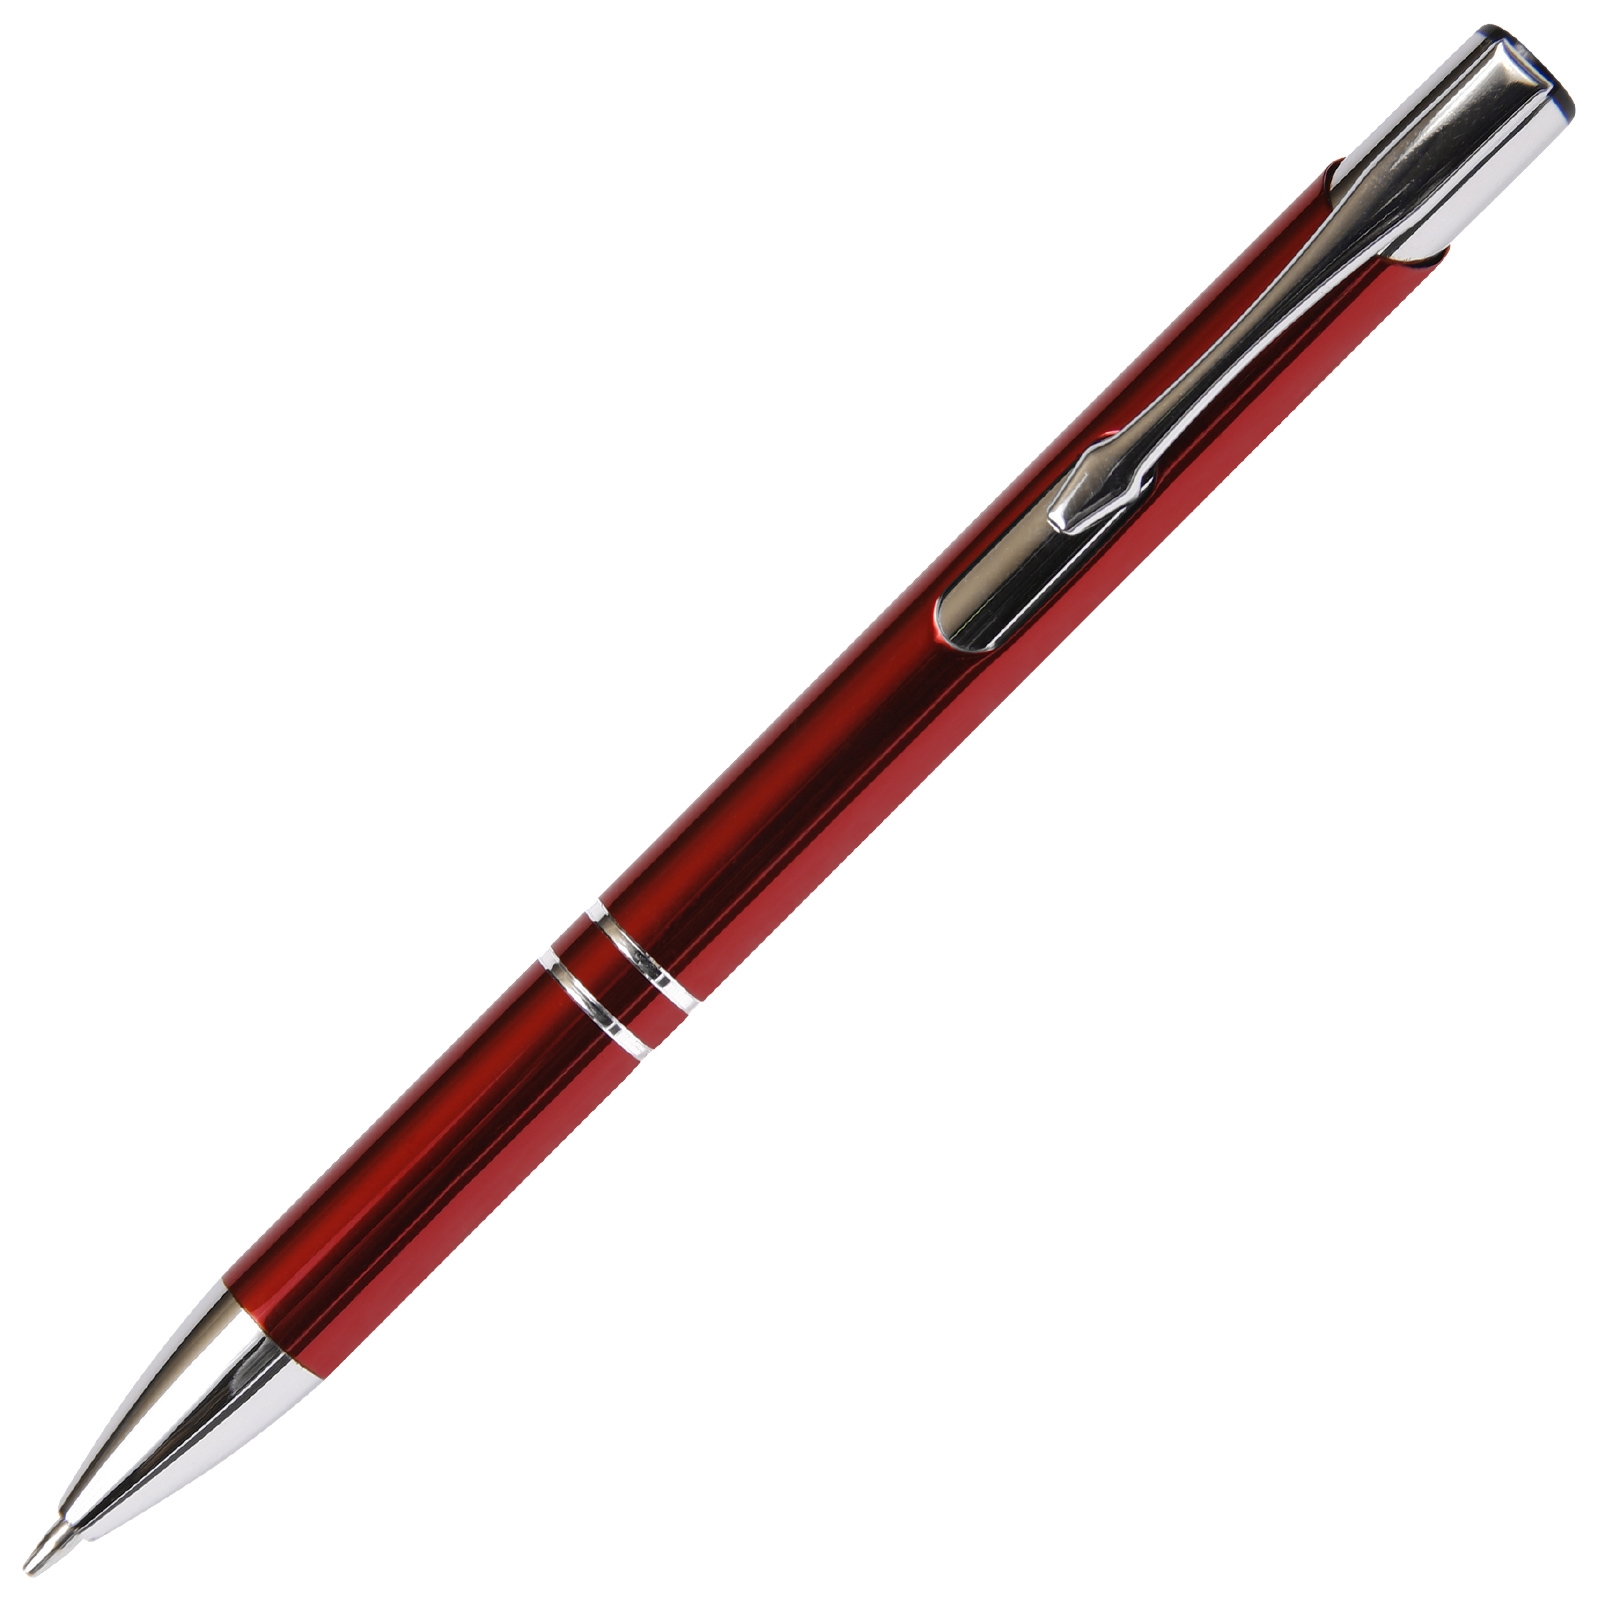 Budget Friendly JJ Mechanical Pencil - Red with Standard 0.7mm Lead Refill By Lanier Pens